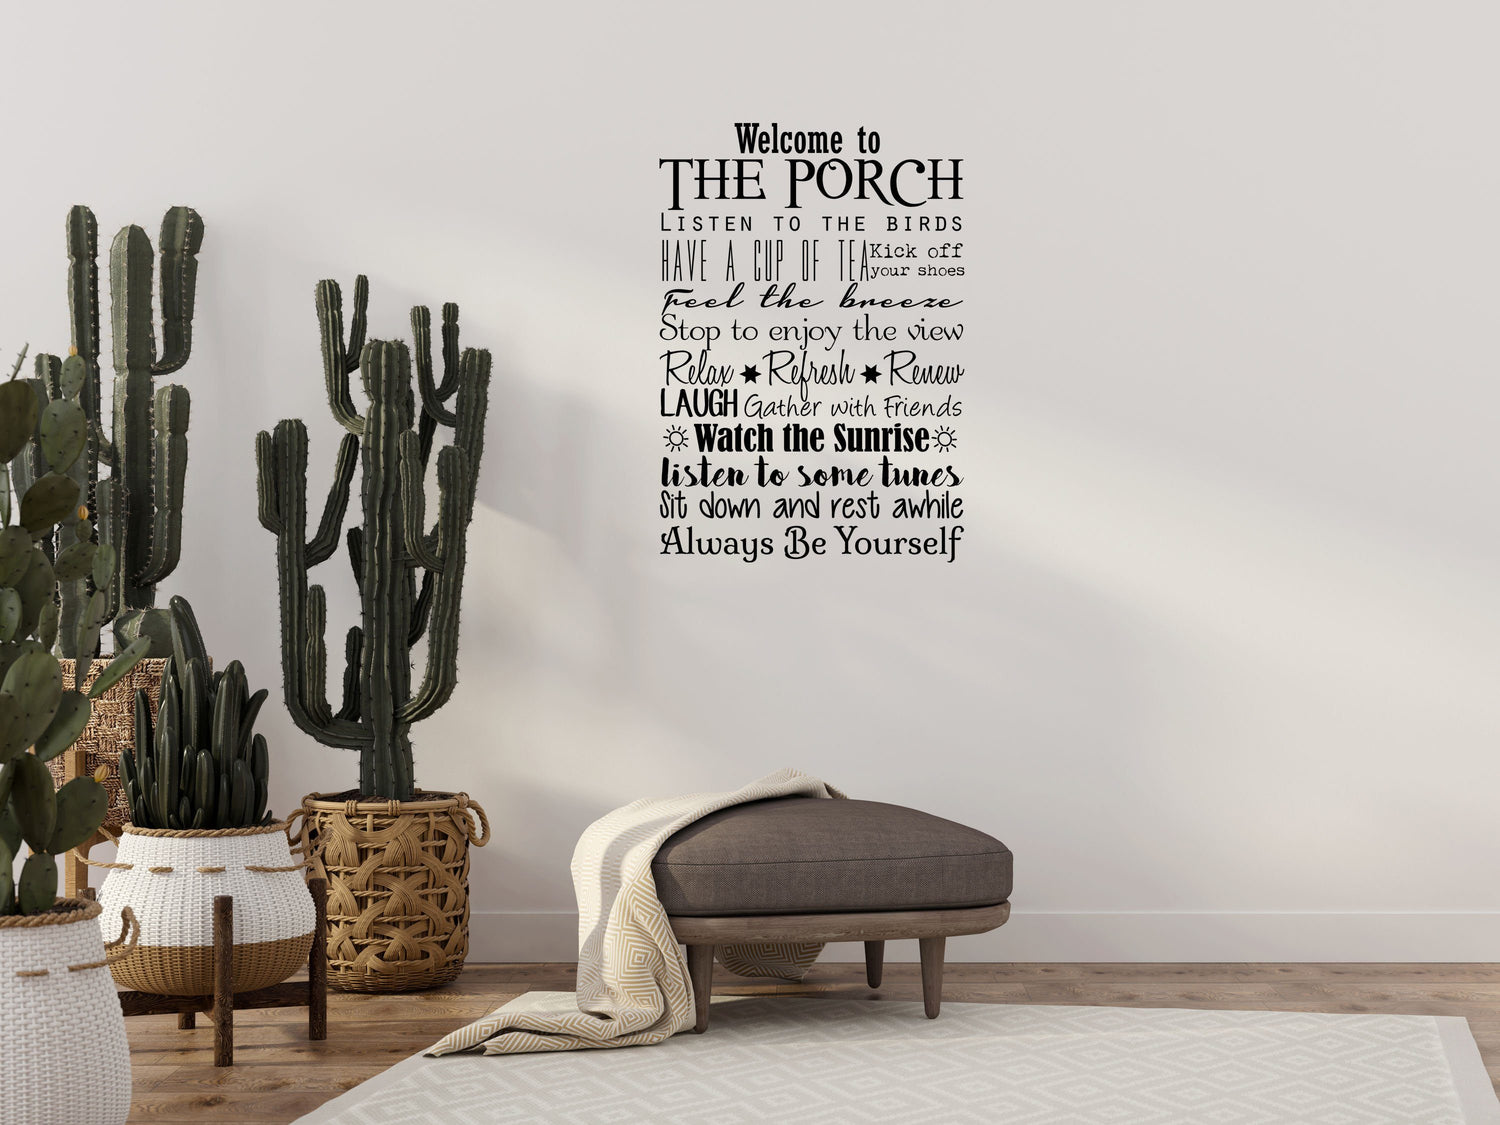 Welcome To The Porch - Inspirational Wall Decals Vinyl Wall Decal Inspirational Wall Signs 